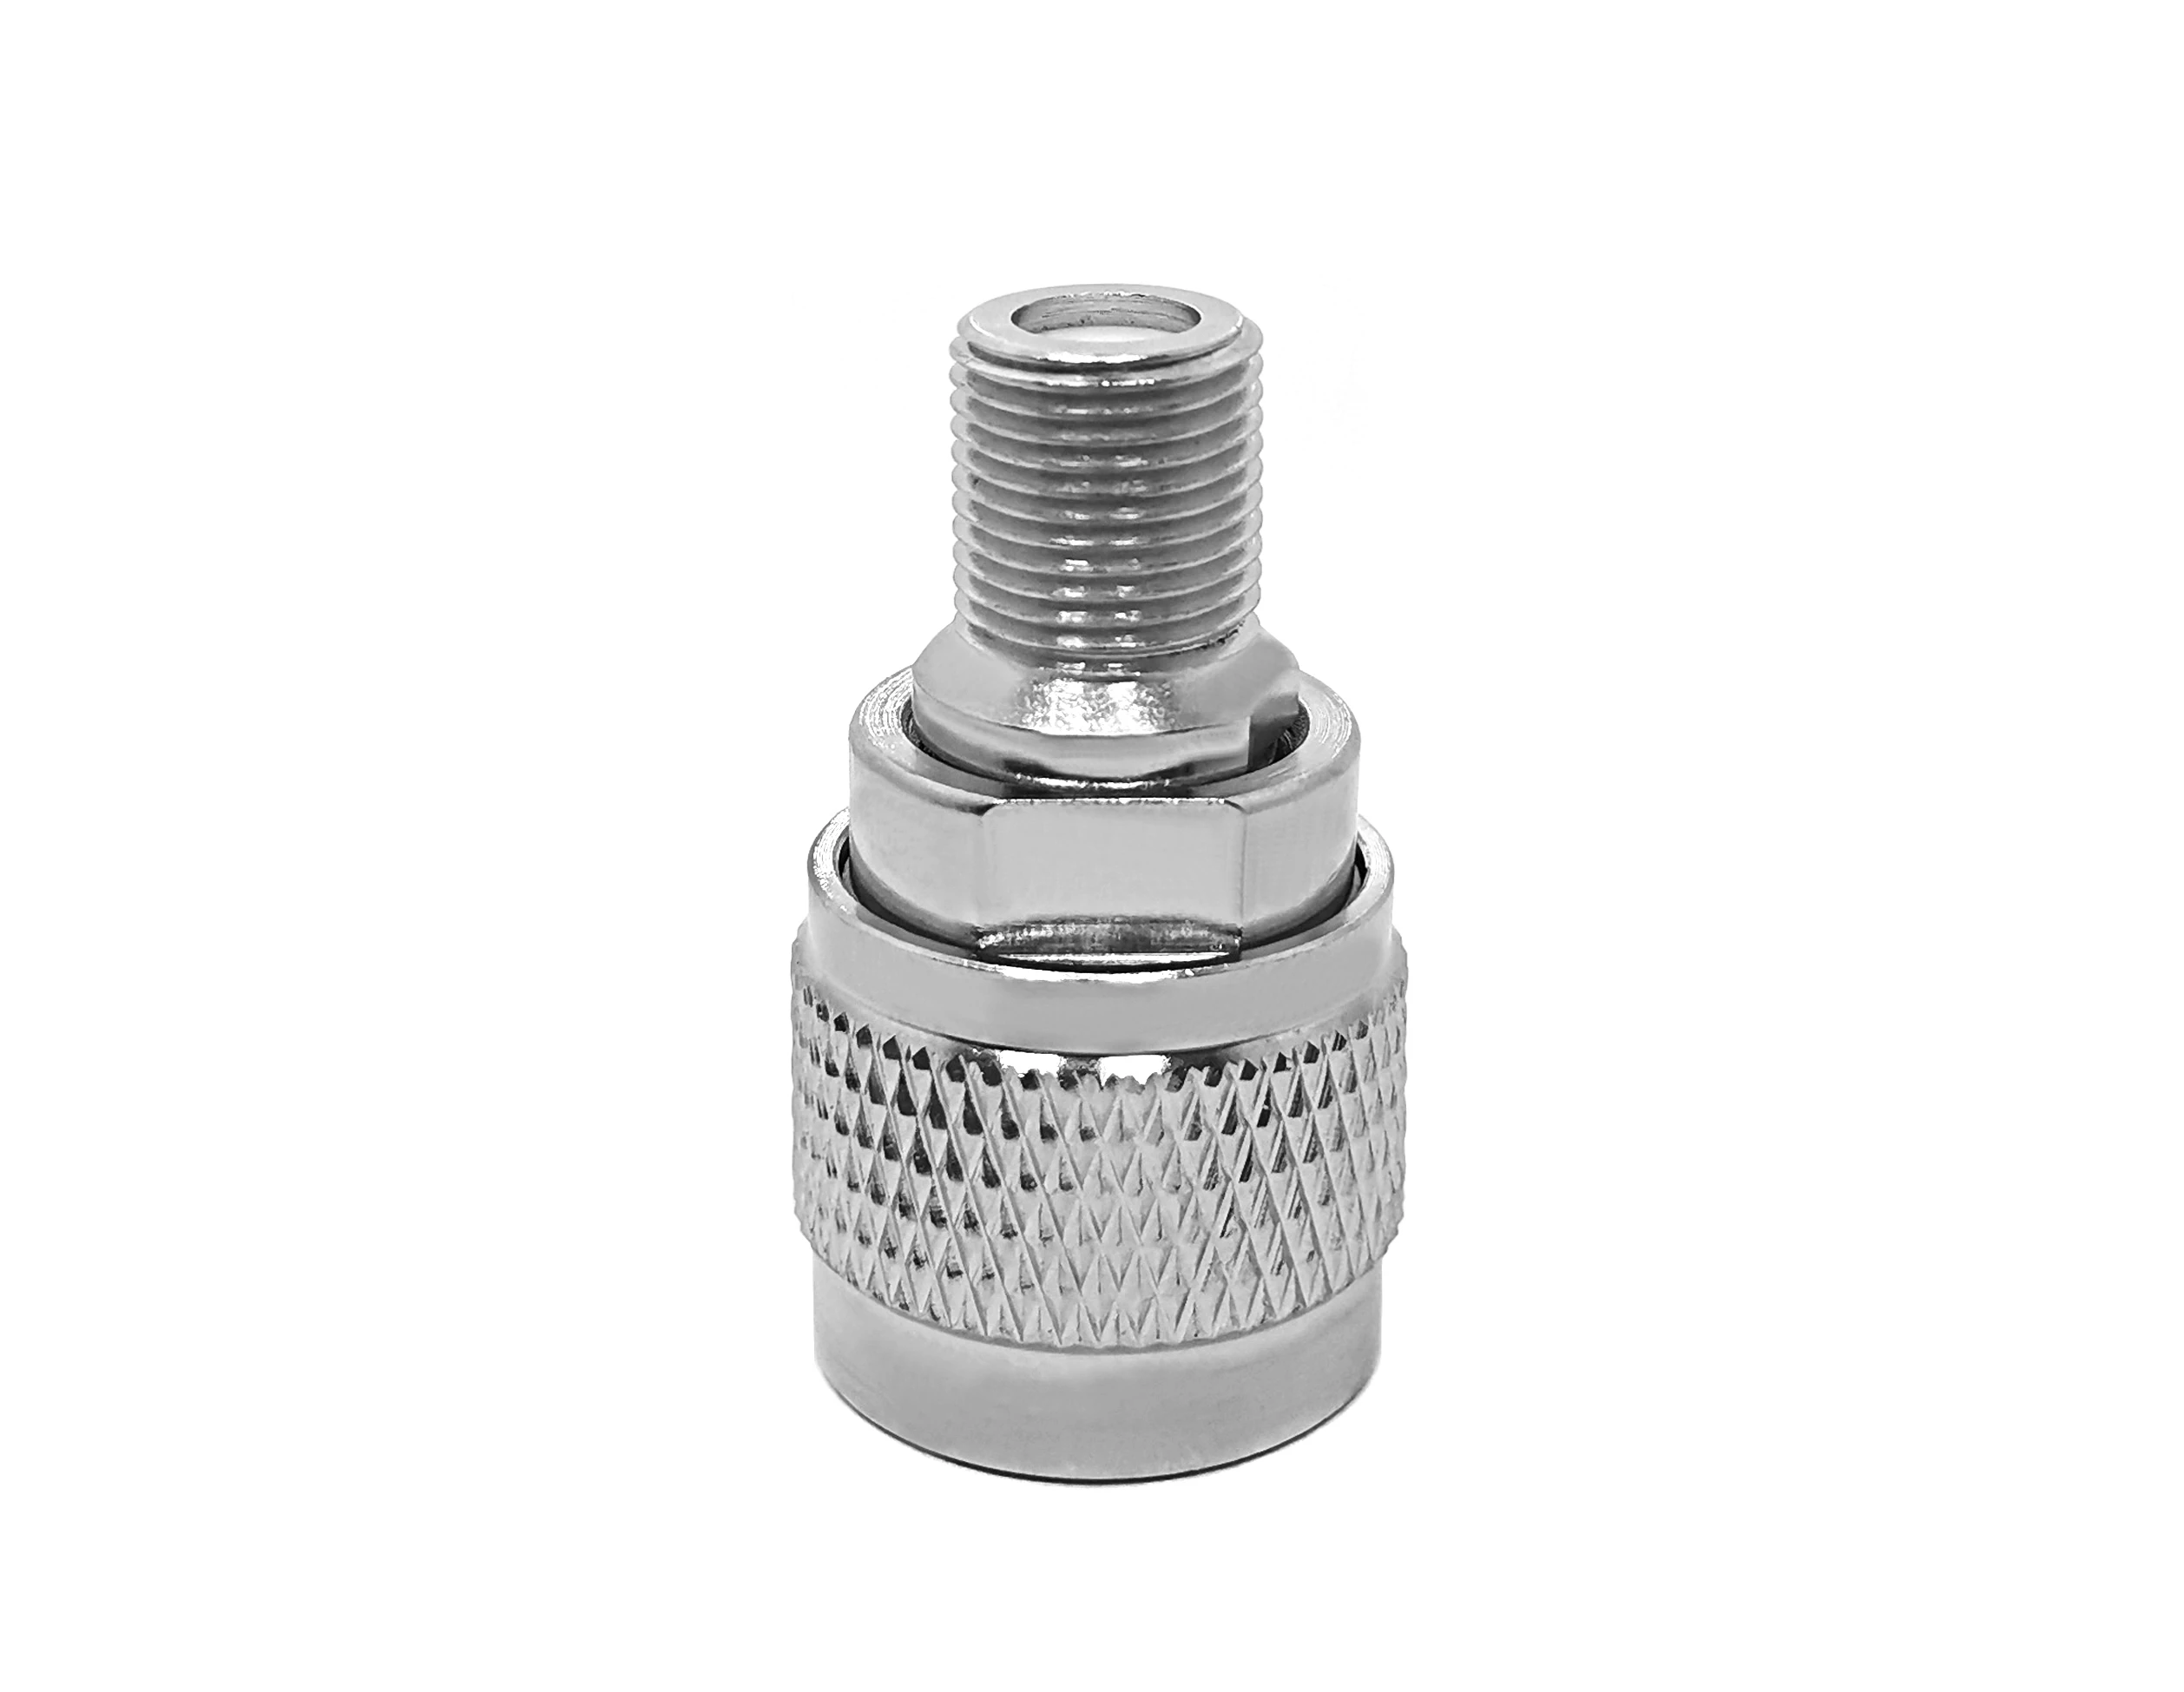 RFVOTON Adaptor n male plug to f female jack brass connector straight rf coaxial adapter manufacture